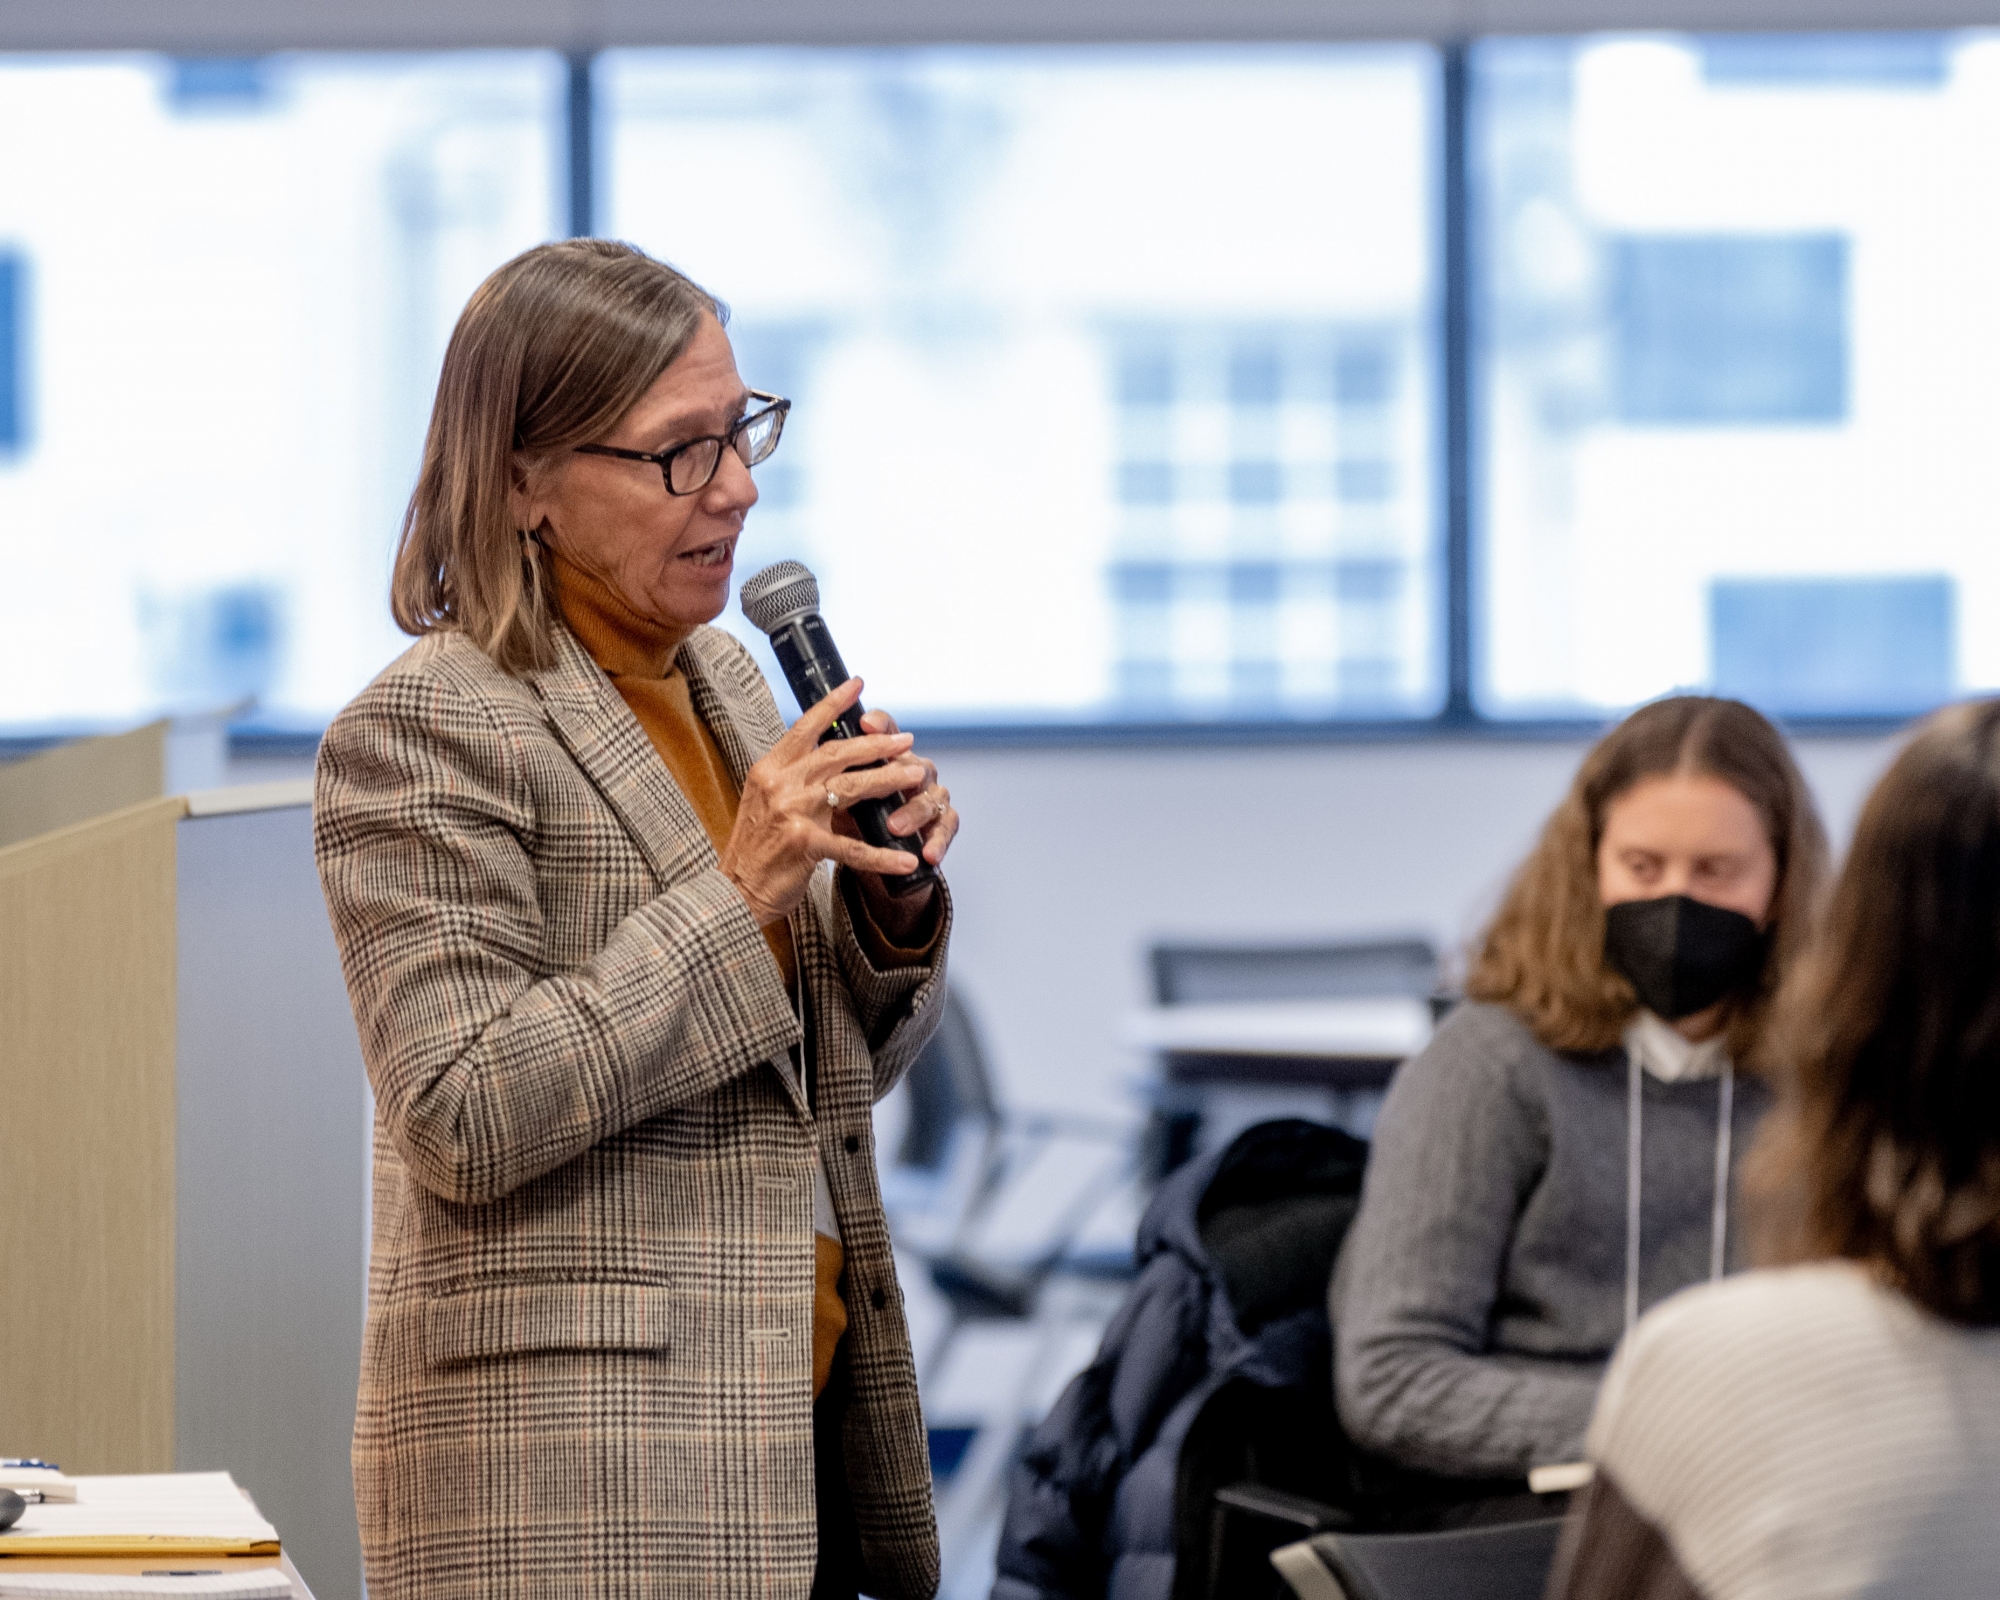 Penn GSE Professor of Education Pam Grossman speaks into a microphone at the front of a conference room while attendees sit and listen.